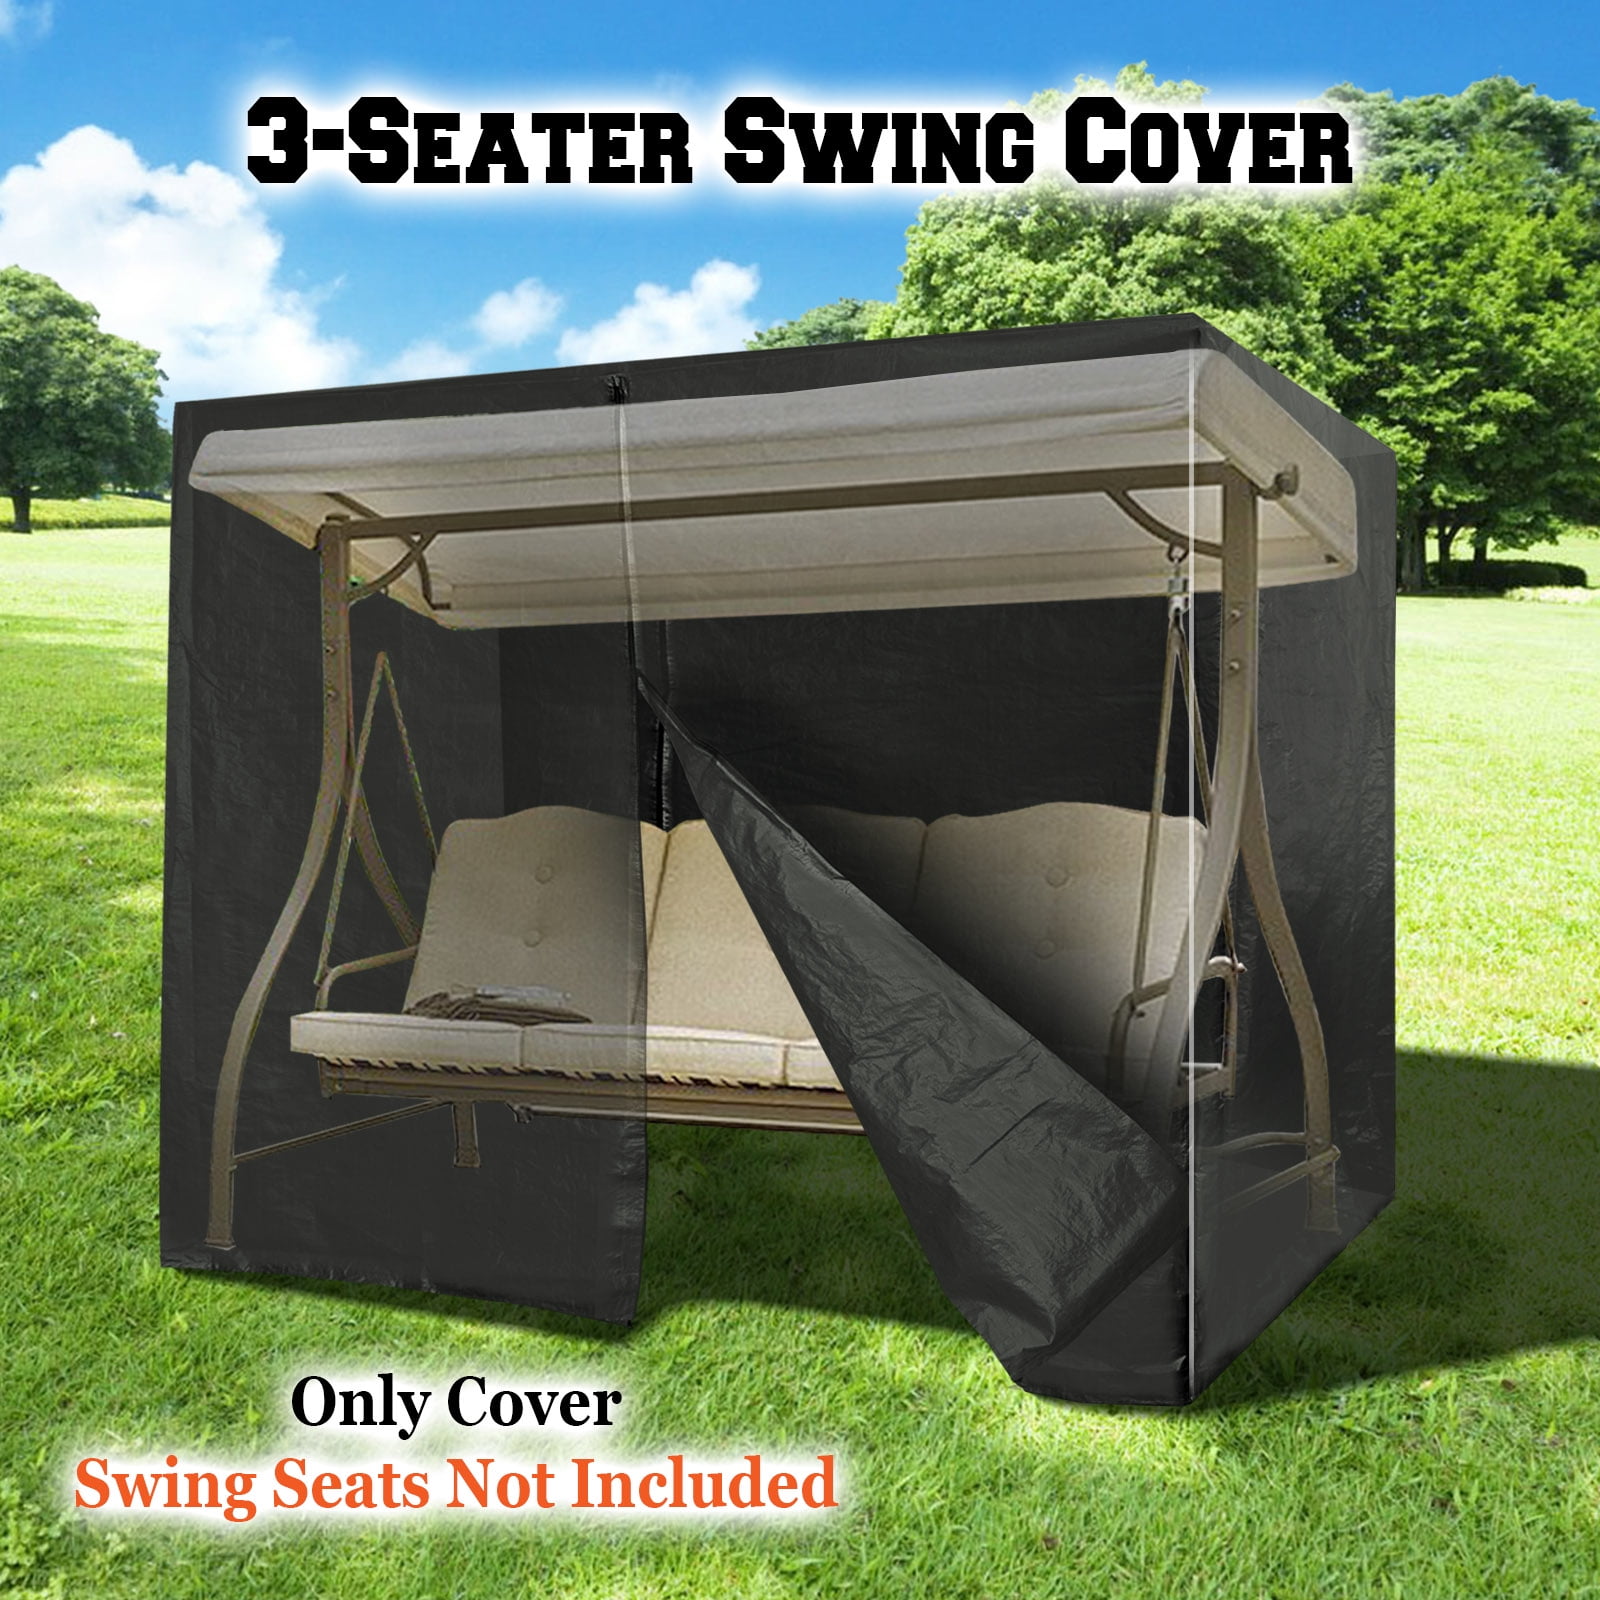 3-Seater 420D Swing Seat Hammock Cover Outdoor Garden Patio Furniture Protector 